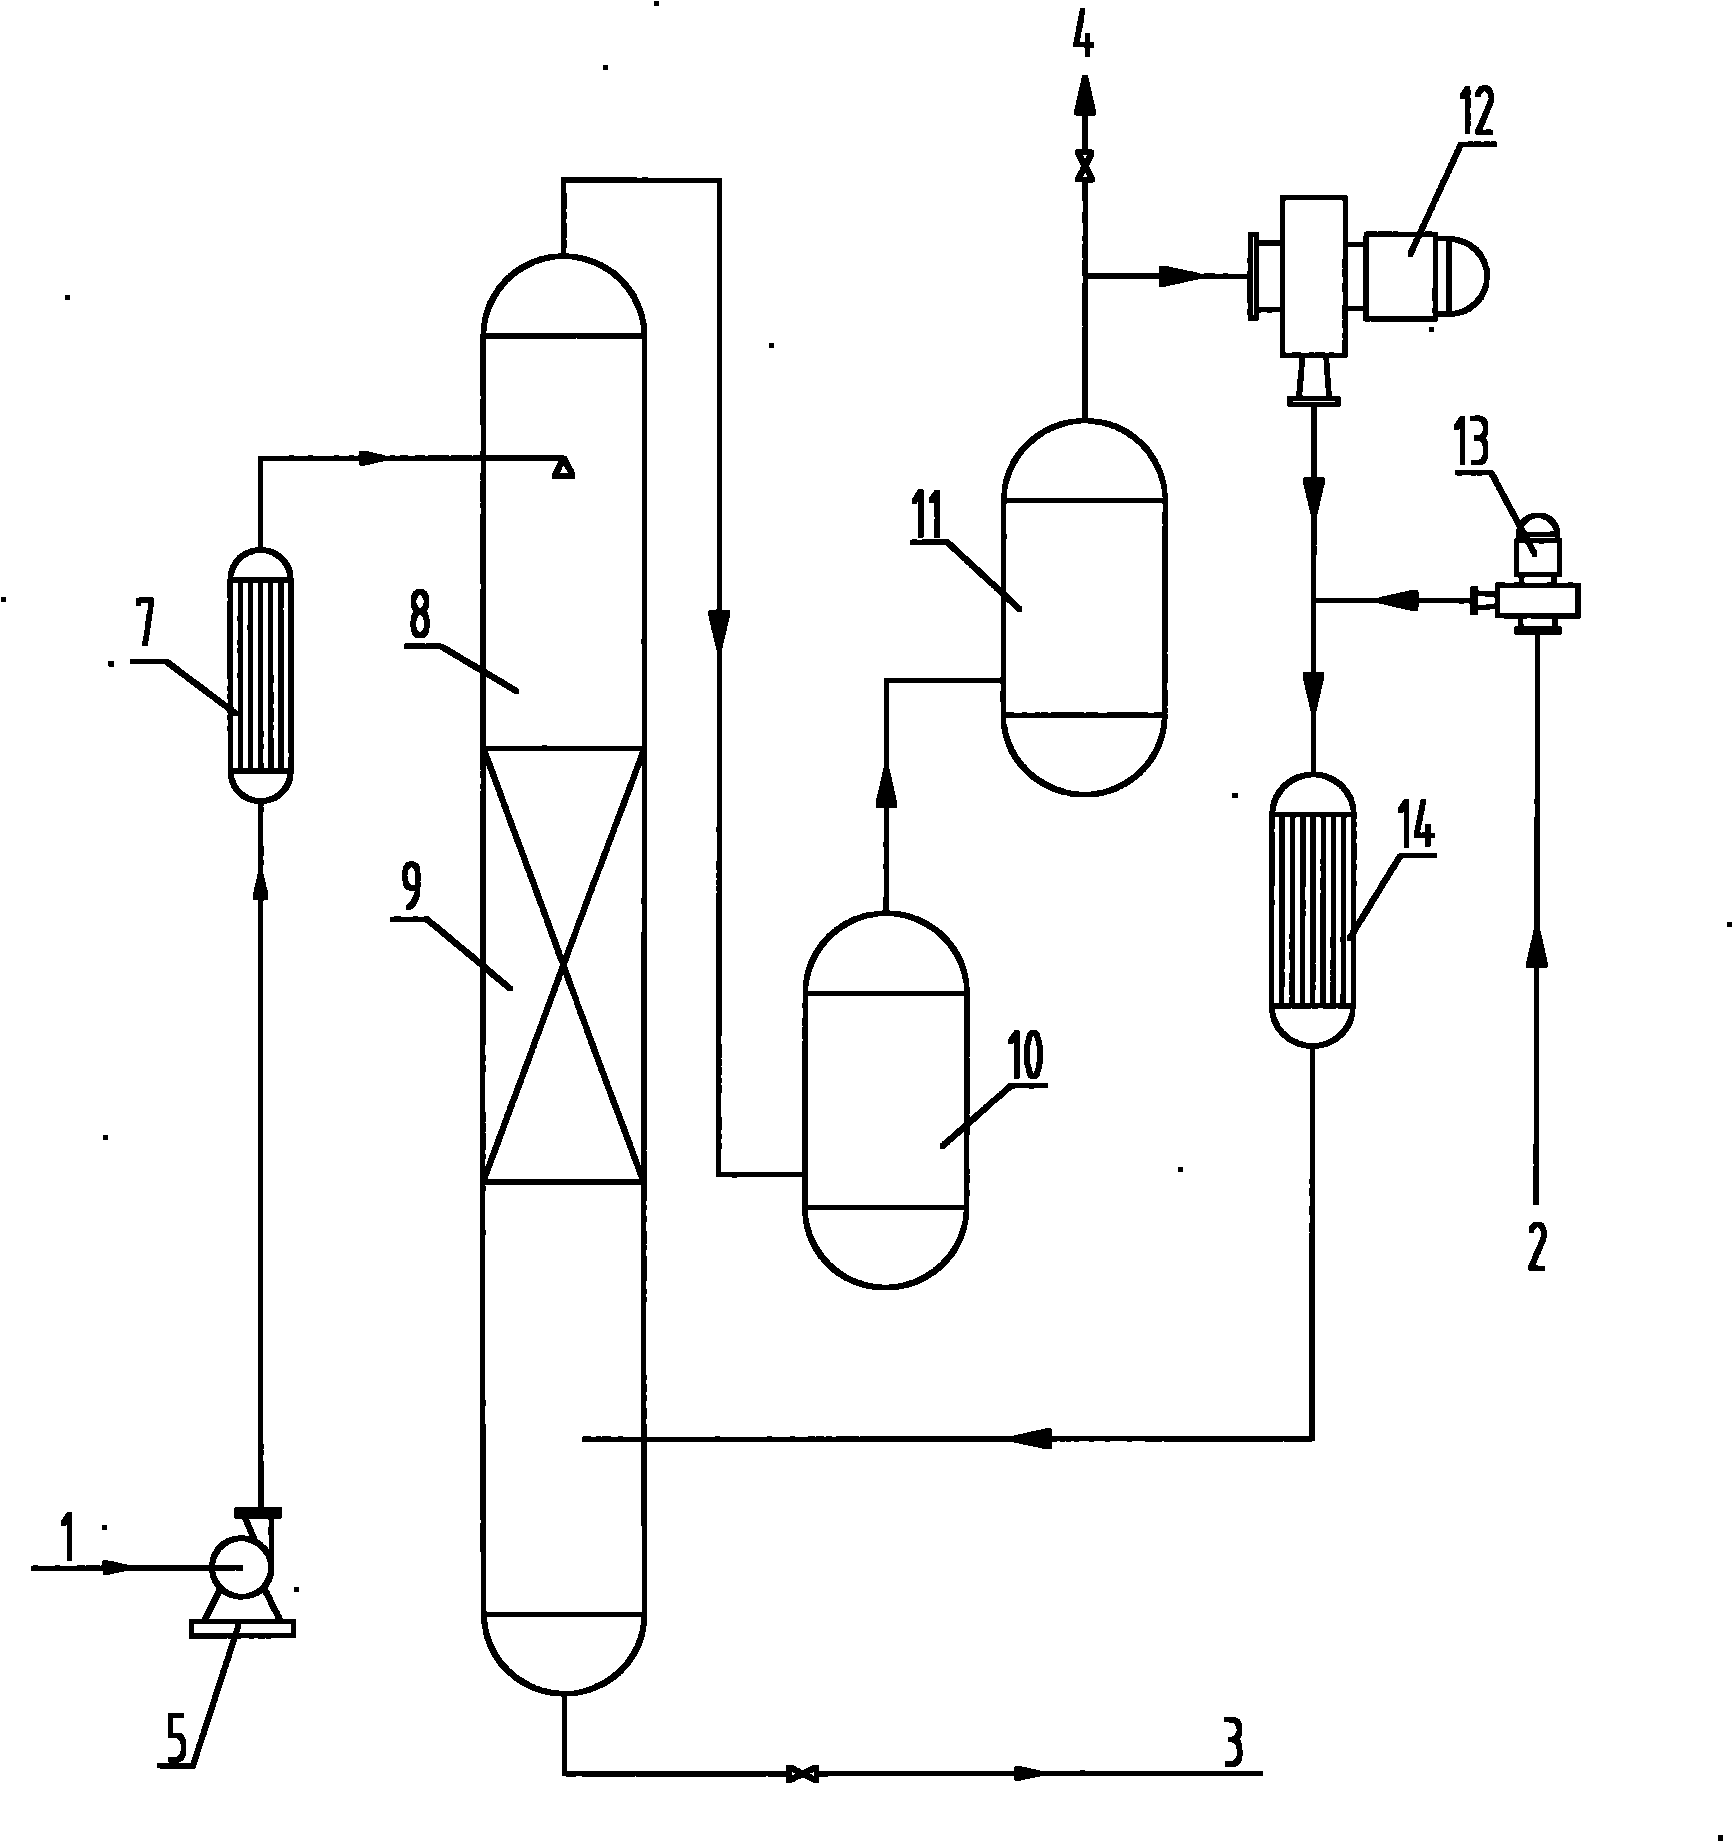 Process for synthesizing benzoquinones by direct oxidation of phenols